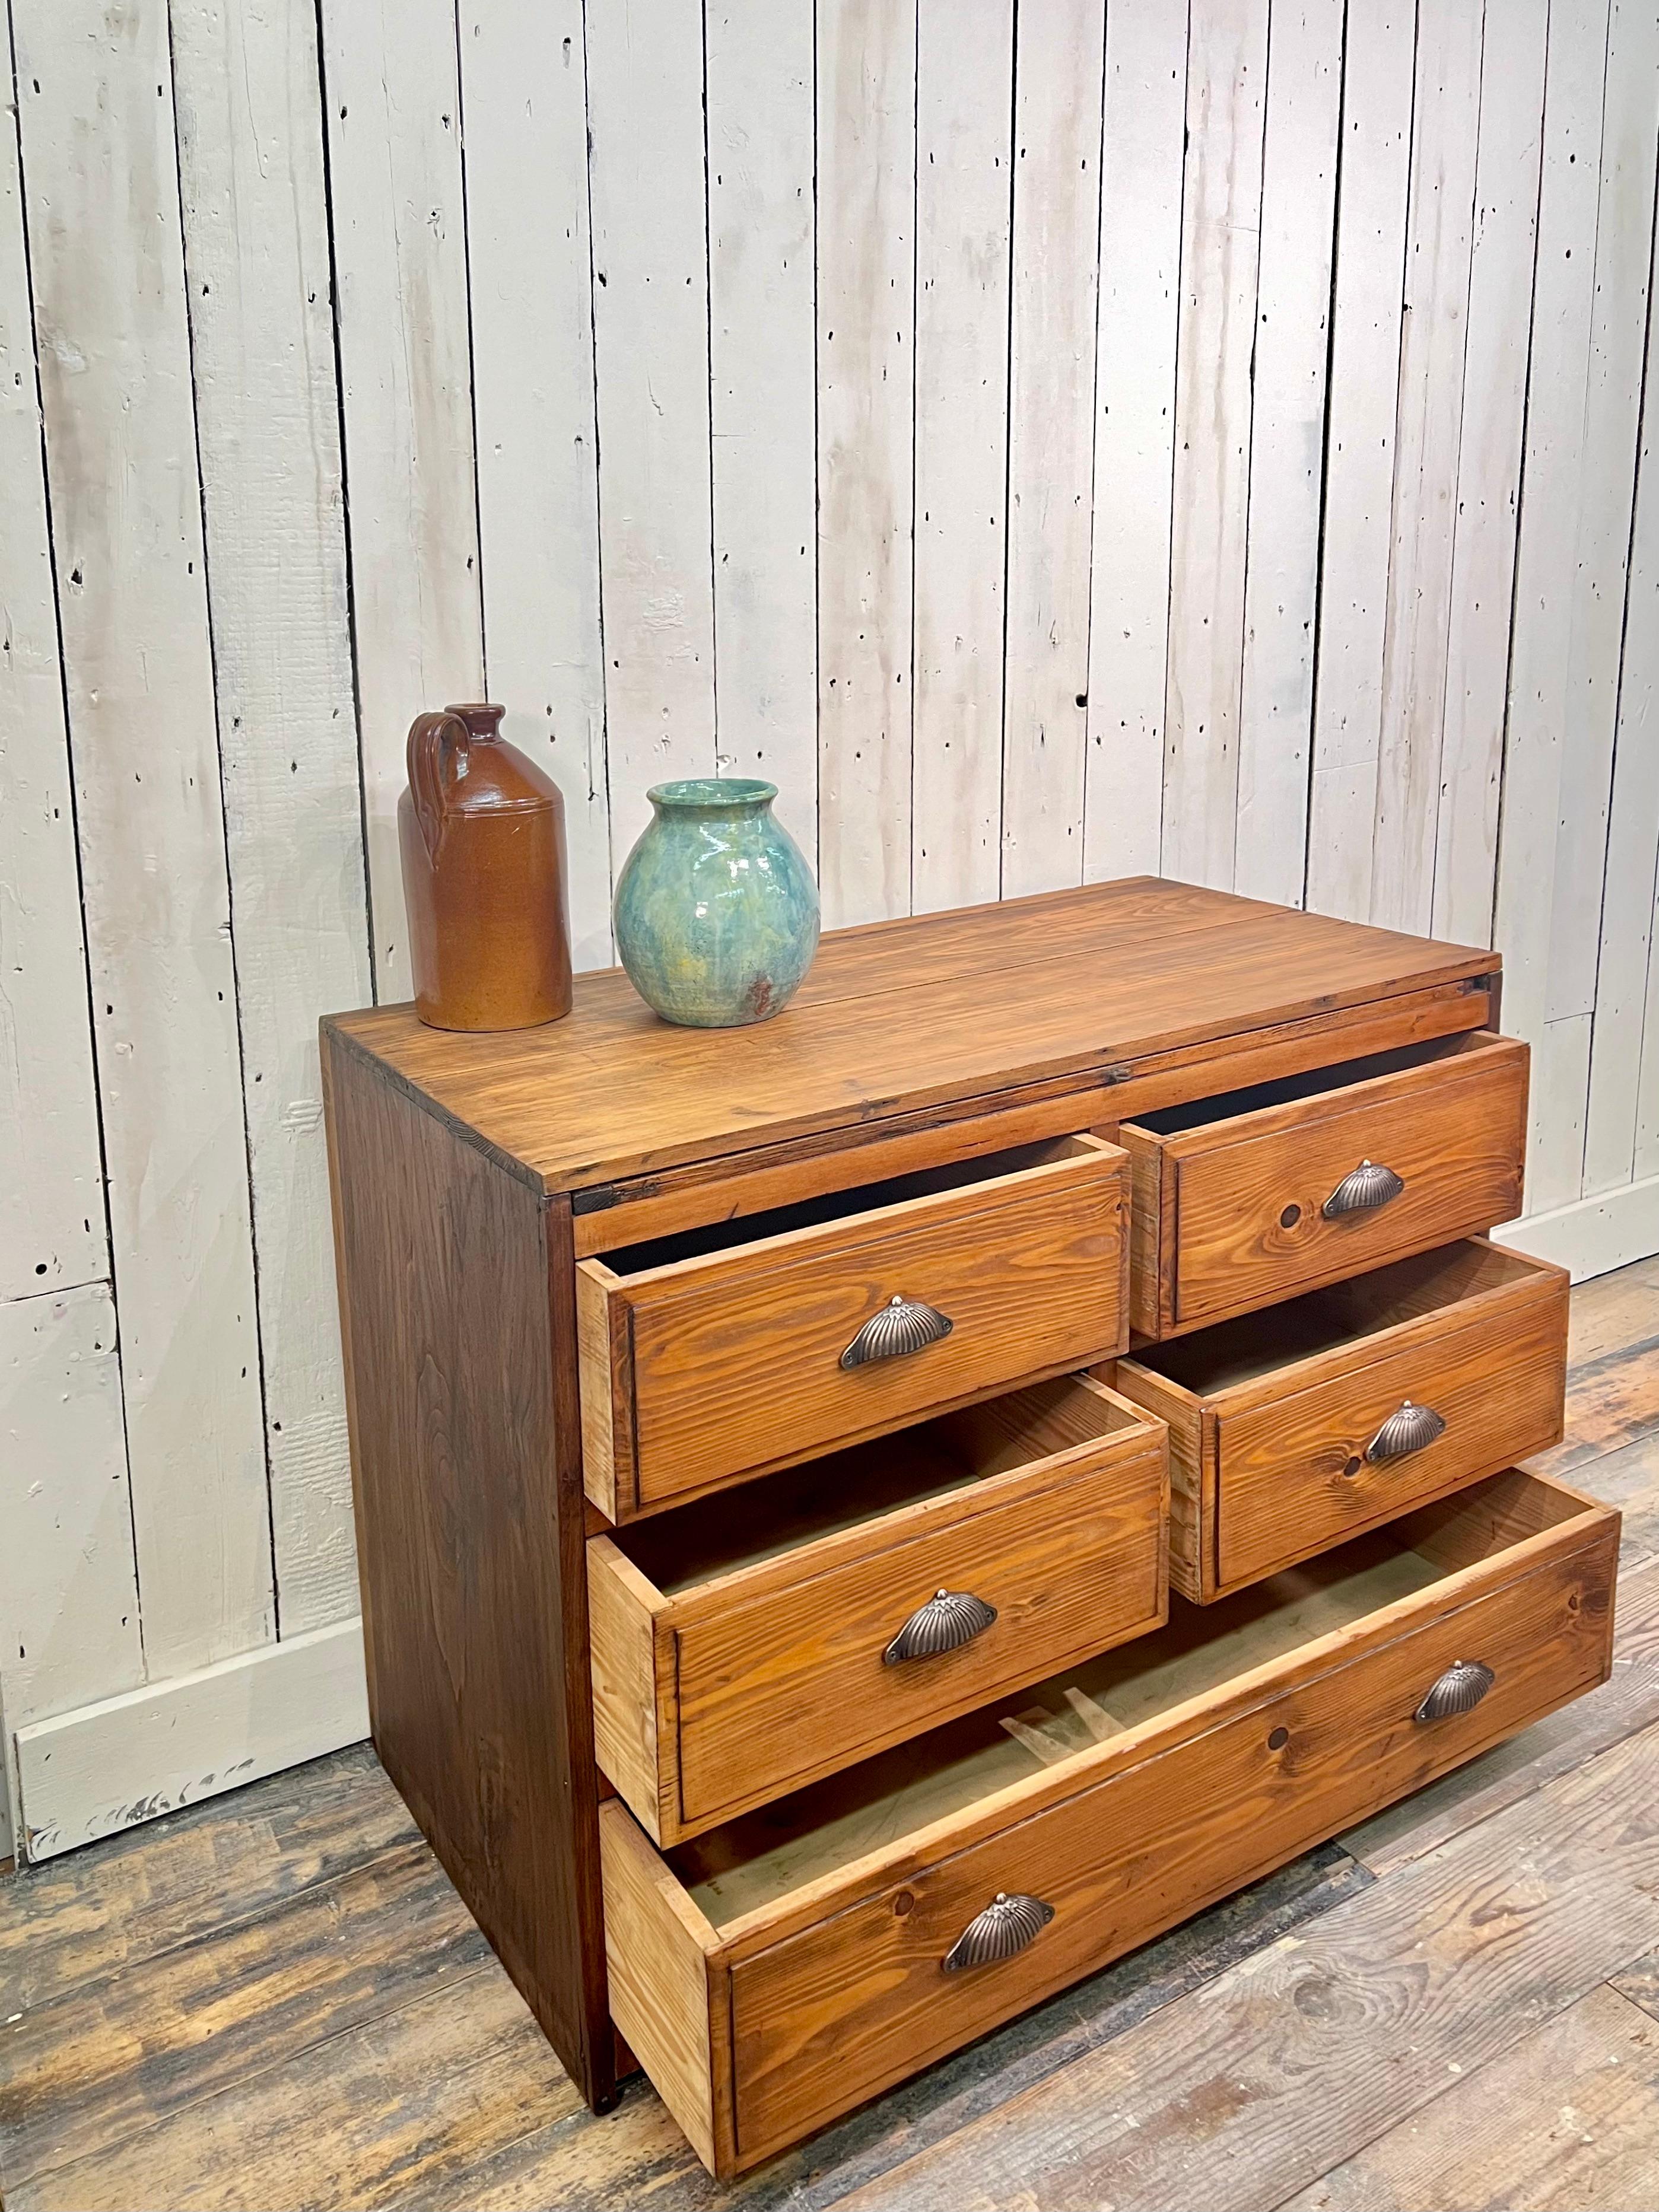 Early 20th Century French 1920's Farmhouse Chest of Drawers/Dresser